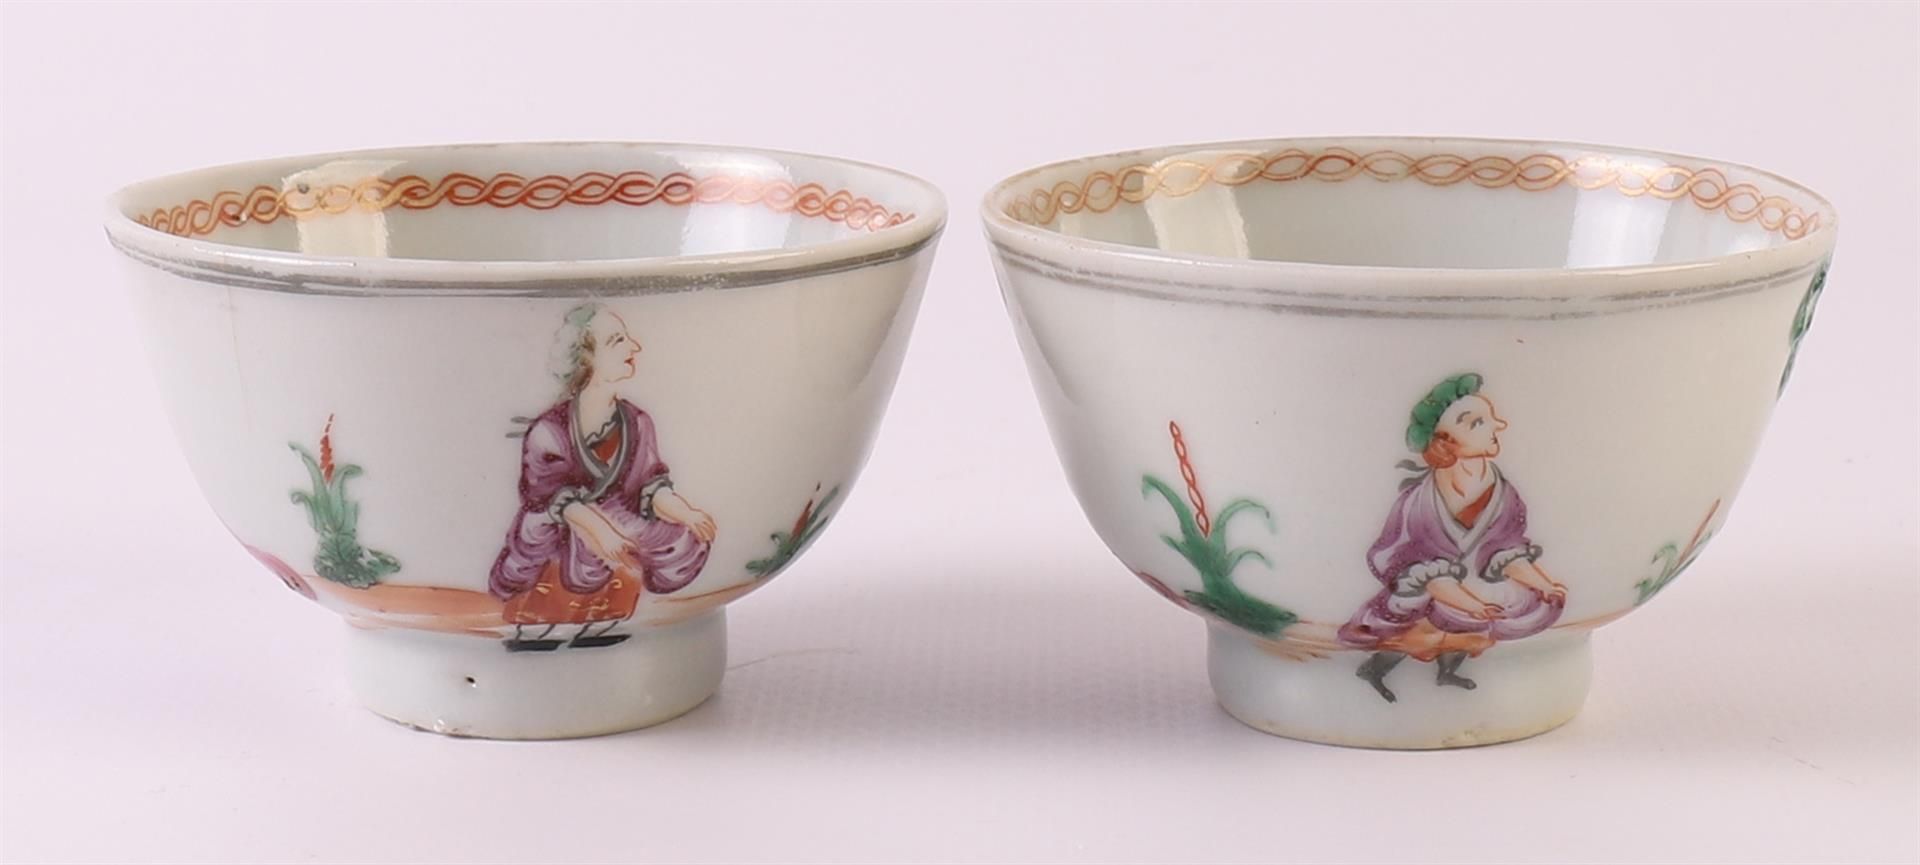 Four porcelain cups and accompanying saucers, Chine de Commande, China, Qianlong, 18th century. - Image 13 of 22